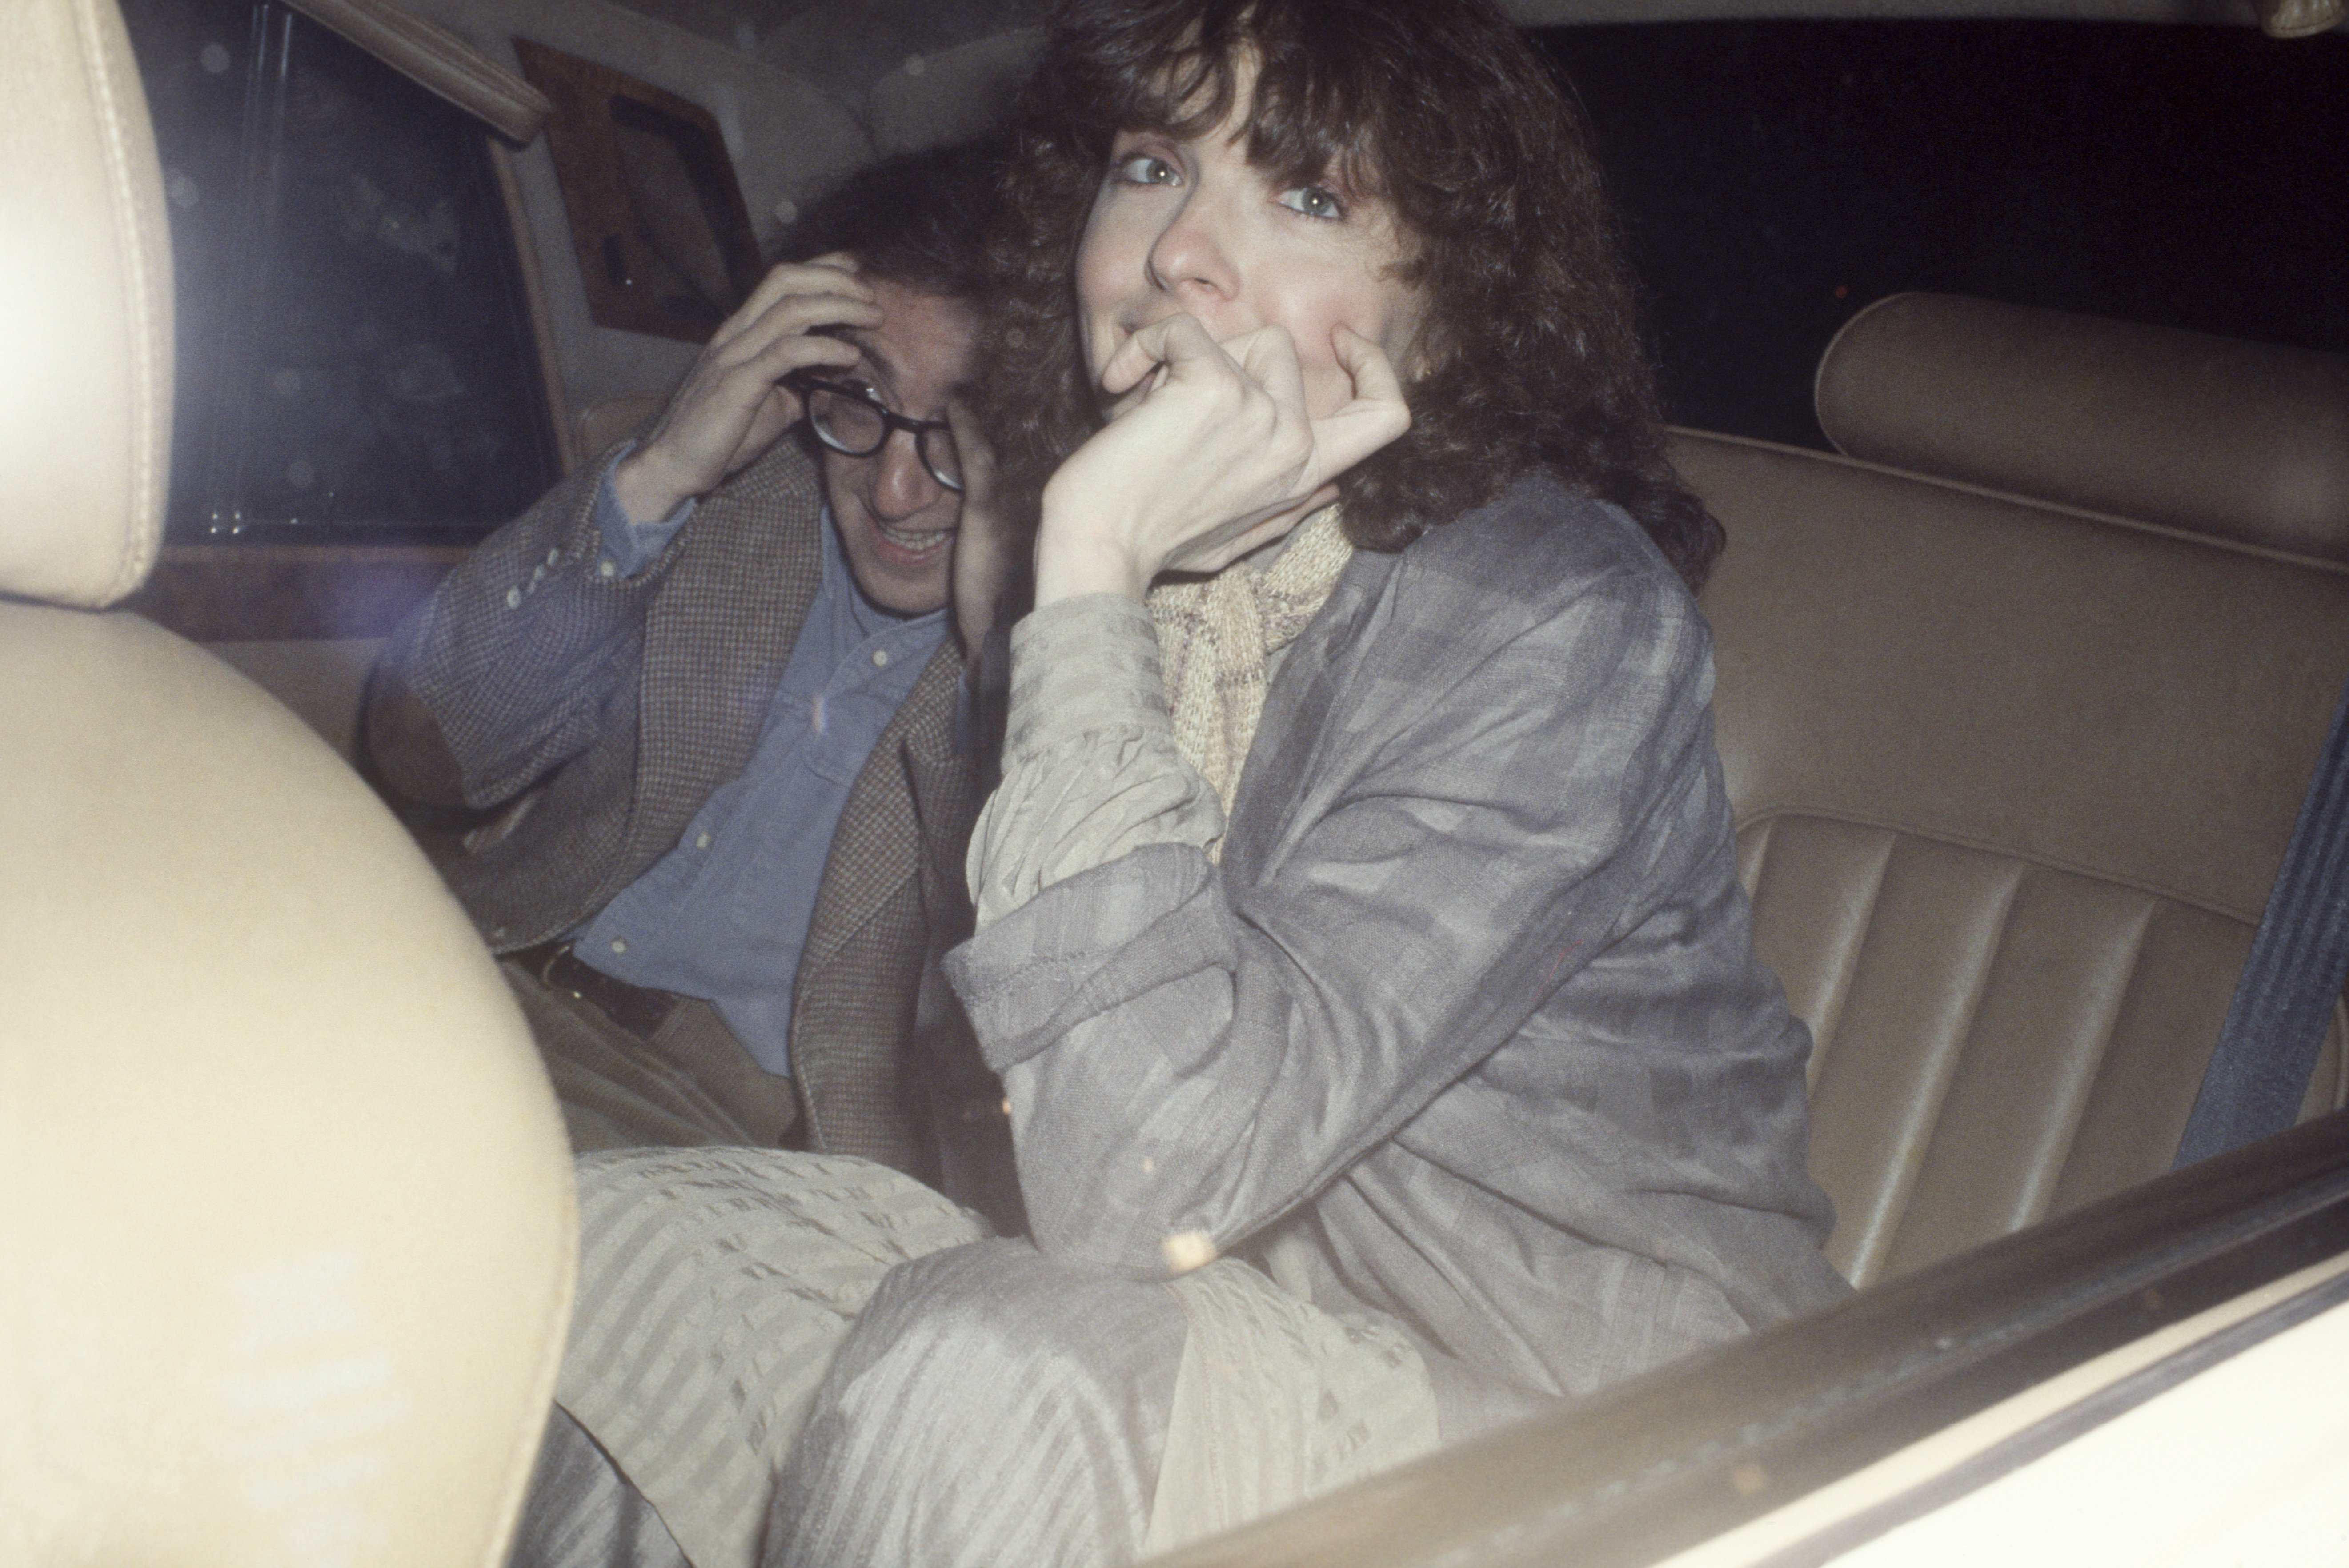 Diane Keaton with Woody Allen in a limousine; circa 1970; New York. | Source: Getty Images